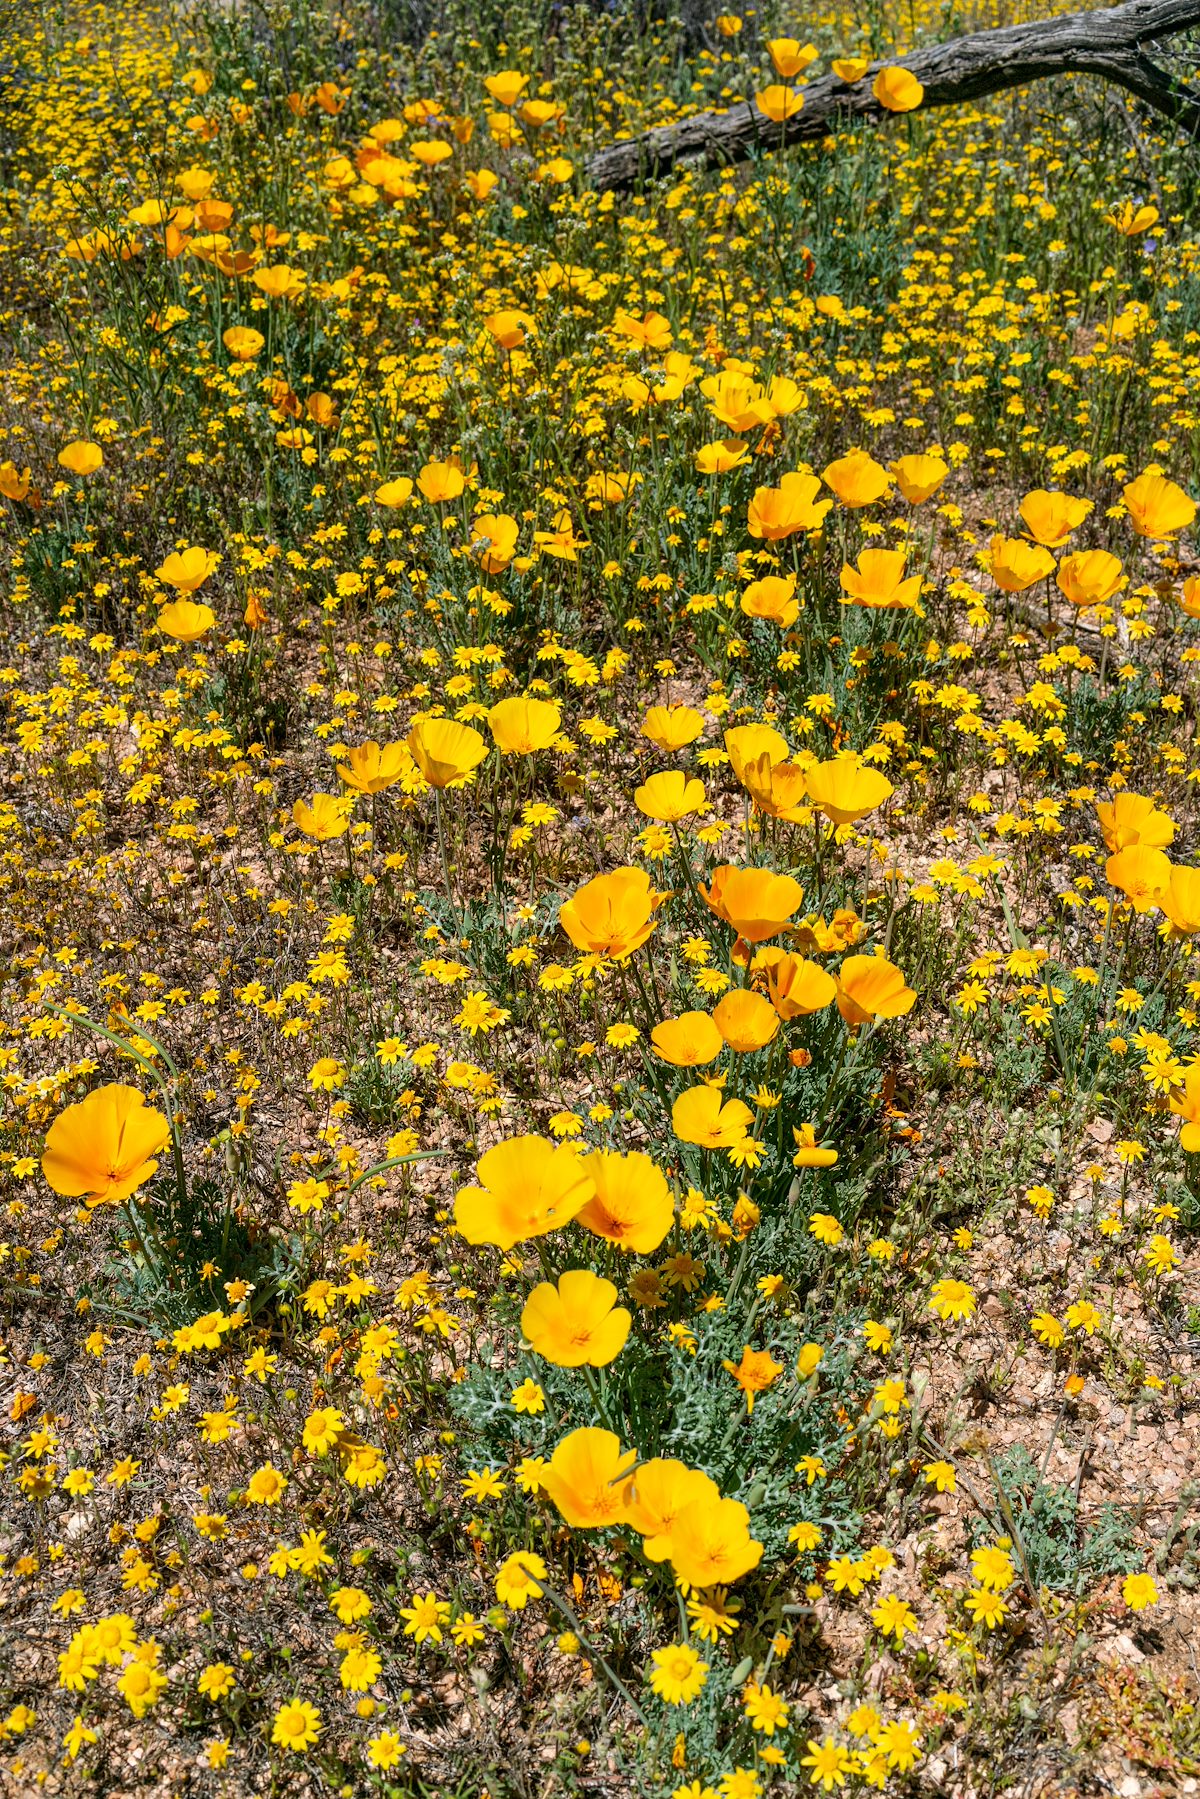 2020 March Poppies and Goldfields along the Arizona Trail